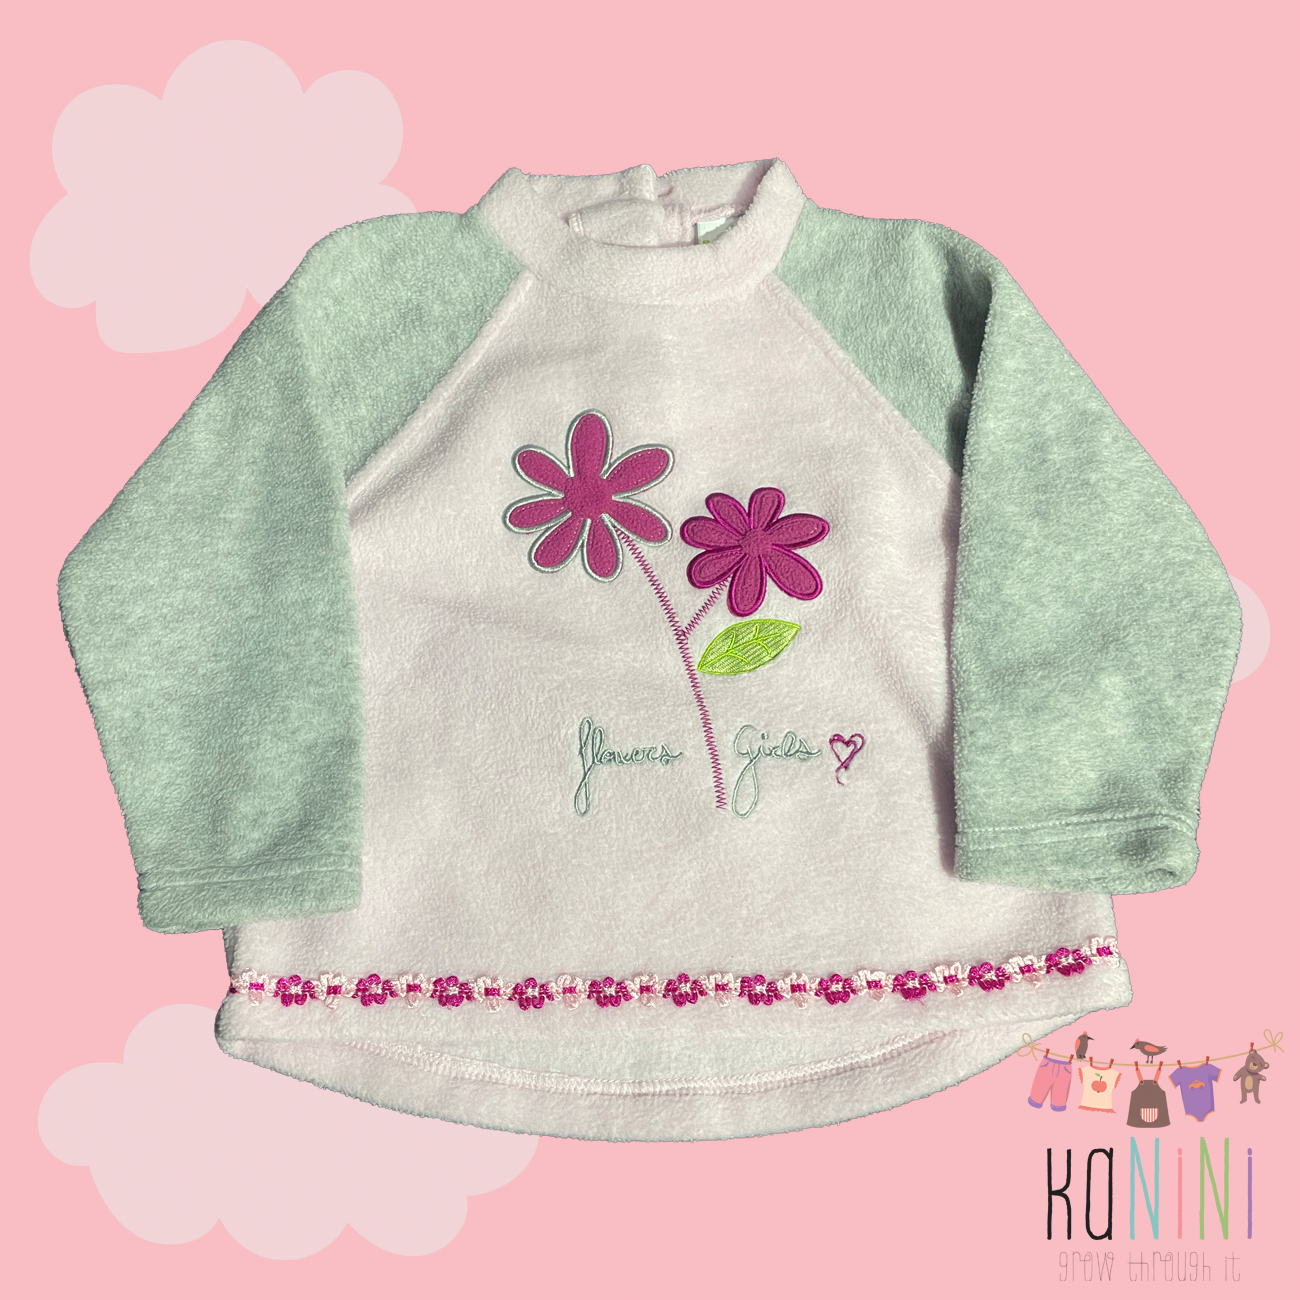 Featured image for “Smiley 12 - 18 Months Girls Sweater”